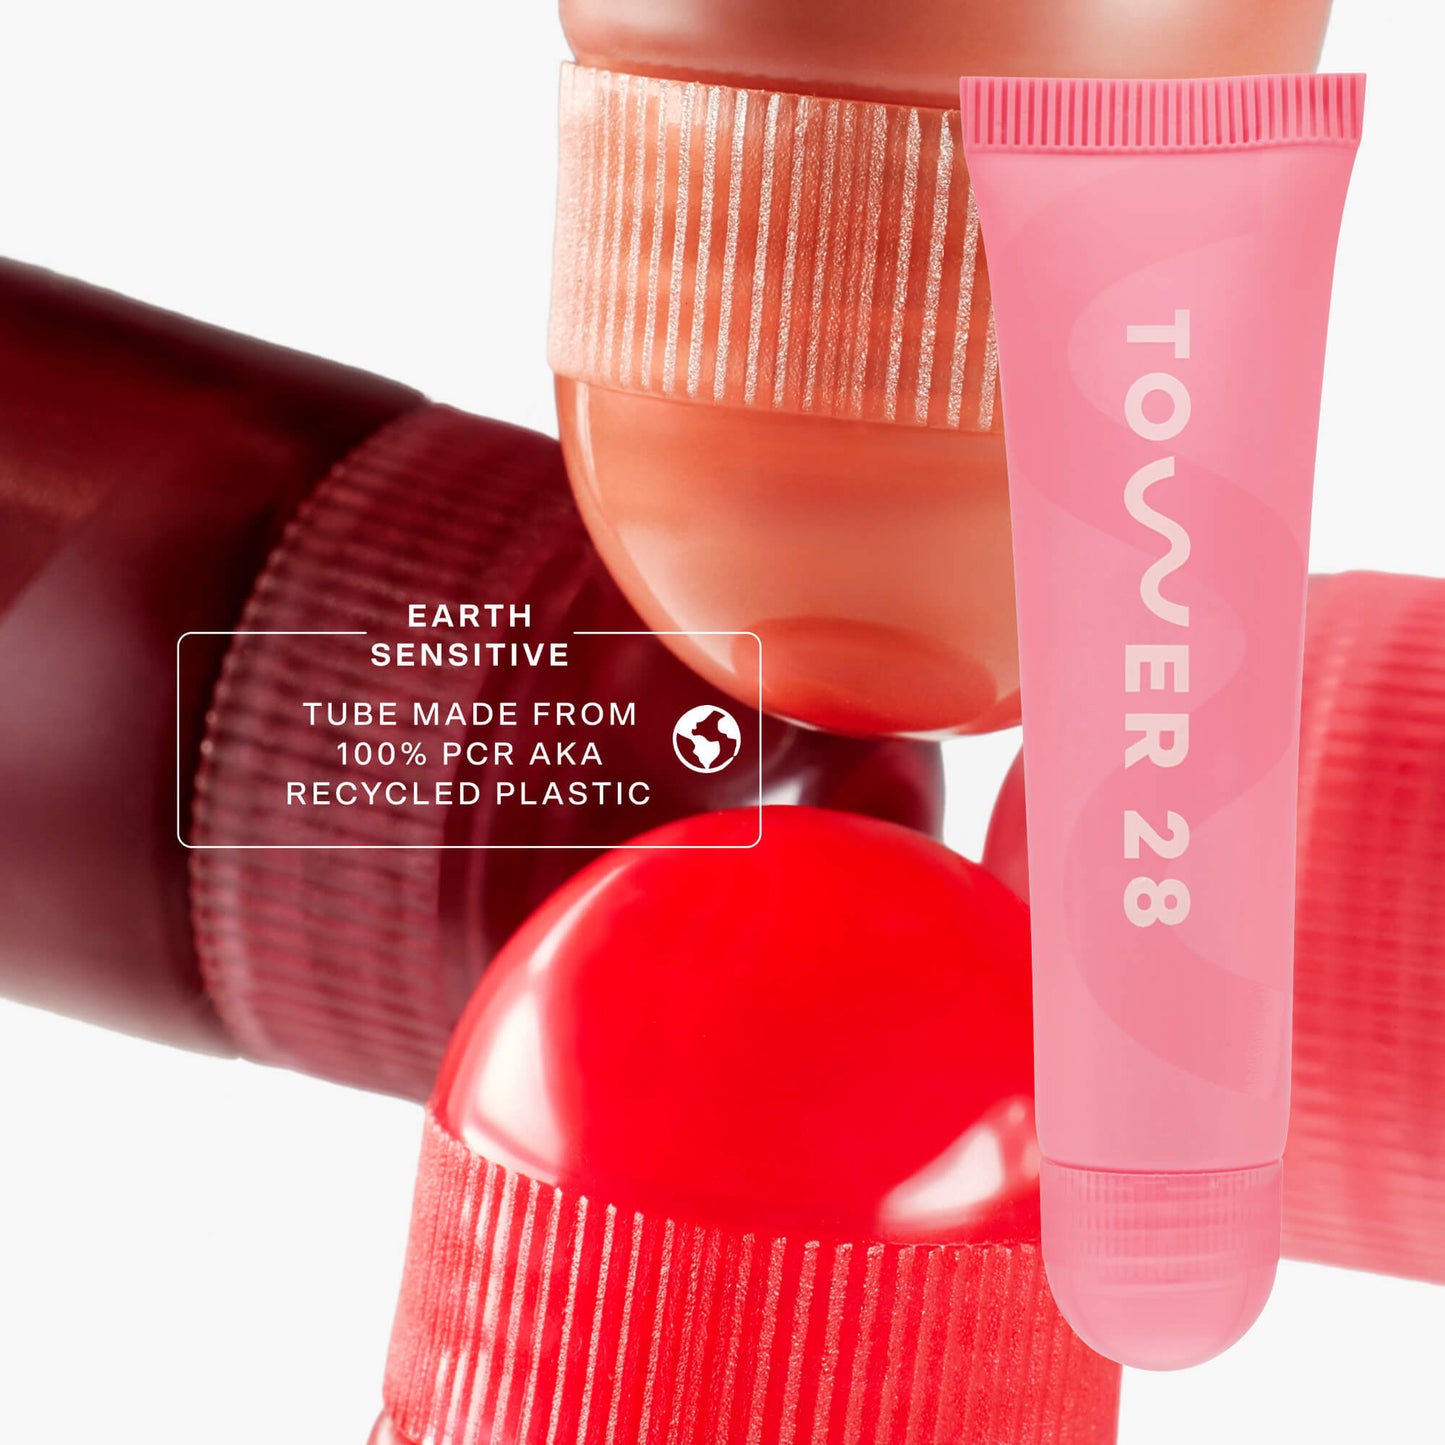 [Tower 28 Beauty LipSoftie™ Lip Treatment in Watermelon Kiwi has 100% recycled plastic packaging.]